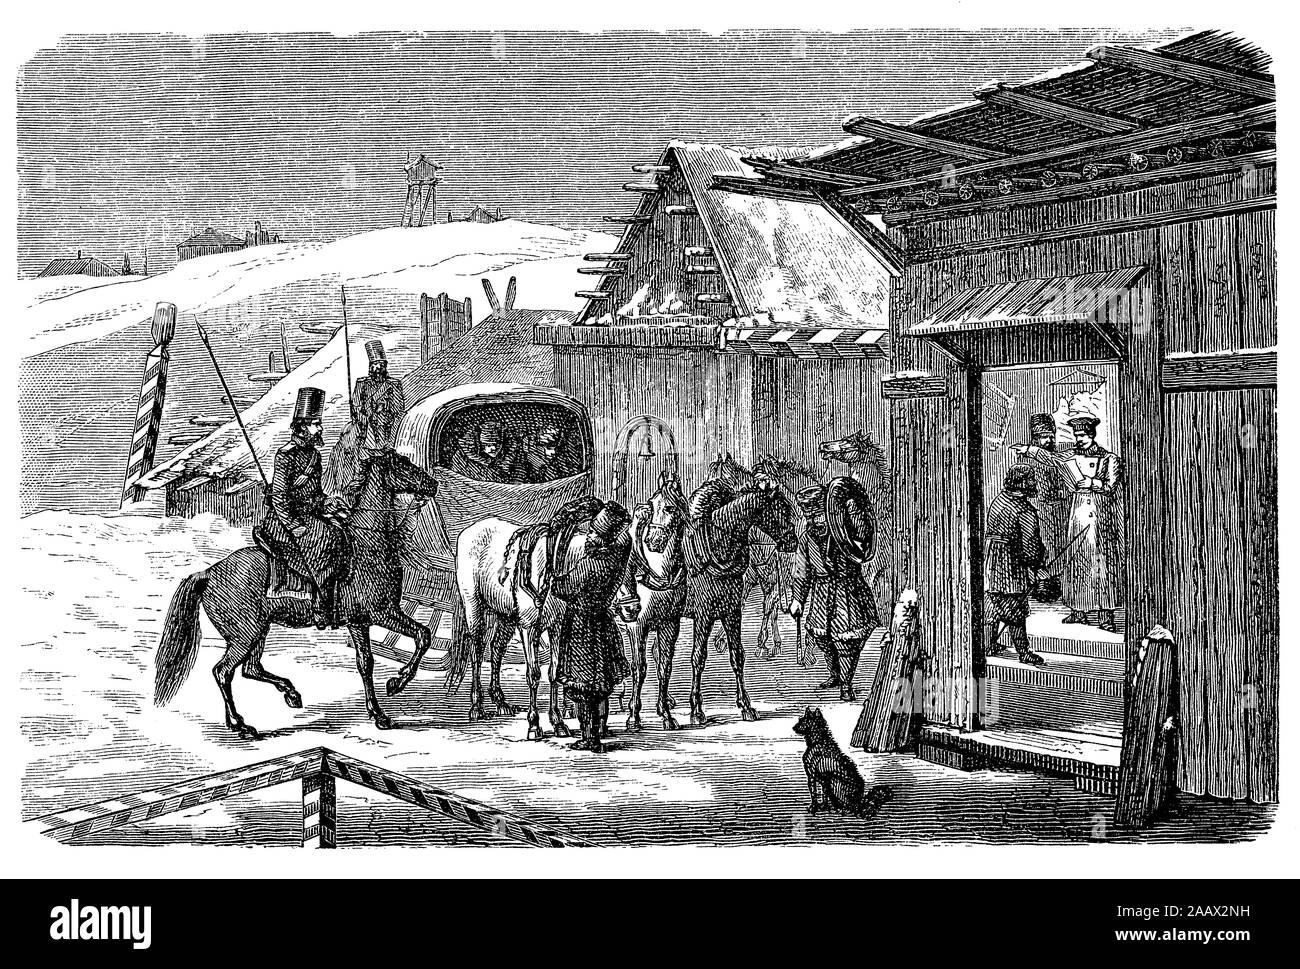 Post office in Siberia 19th century with troika - a sleigh trained by three horses - ready for mail delivery Stock Photo